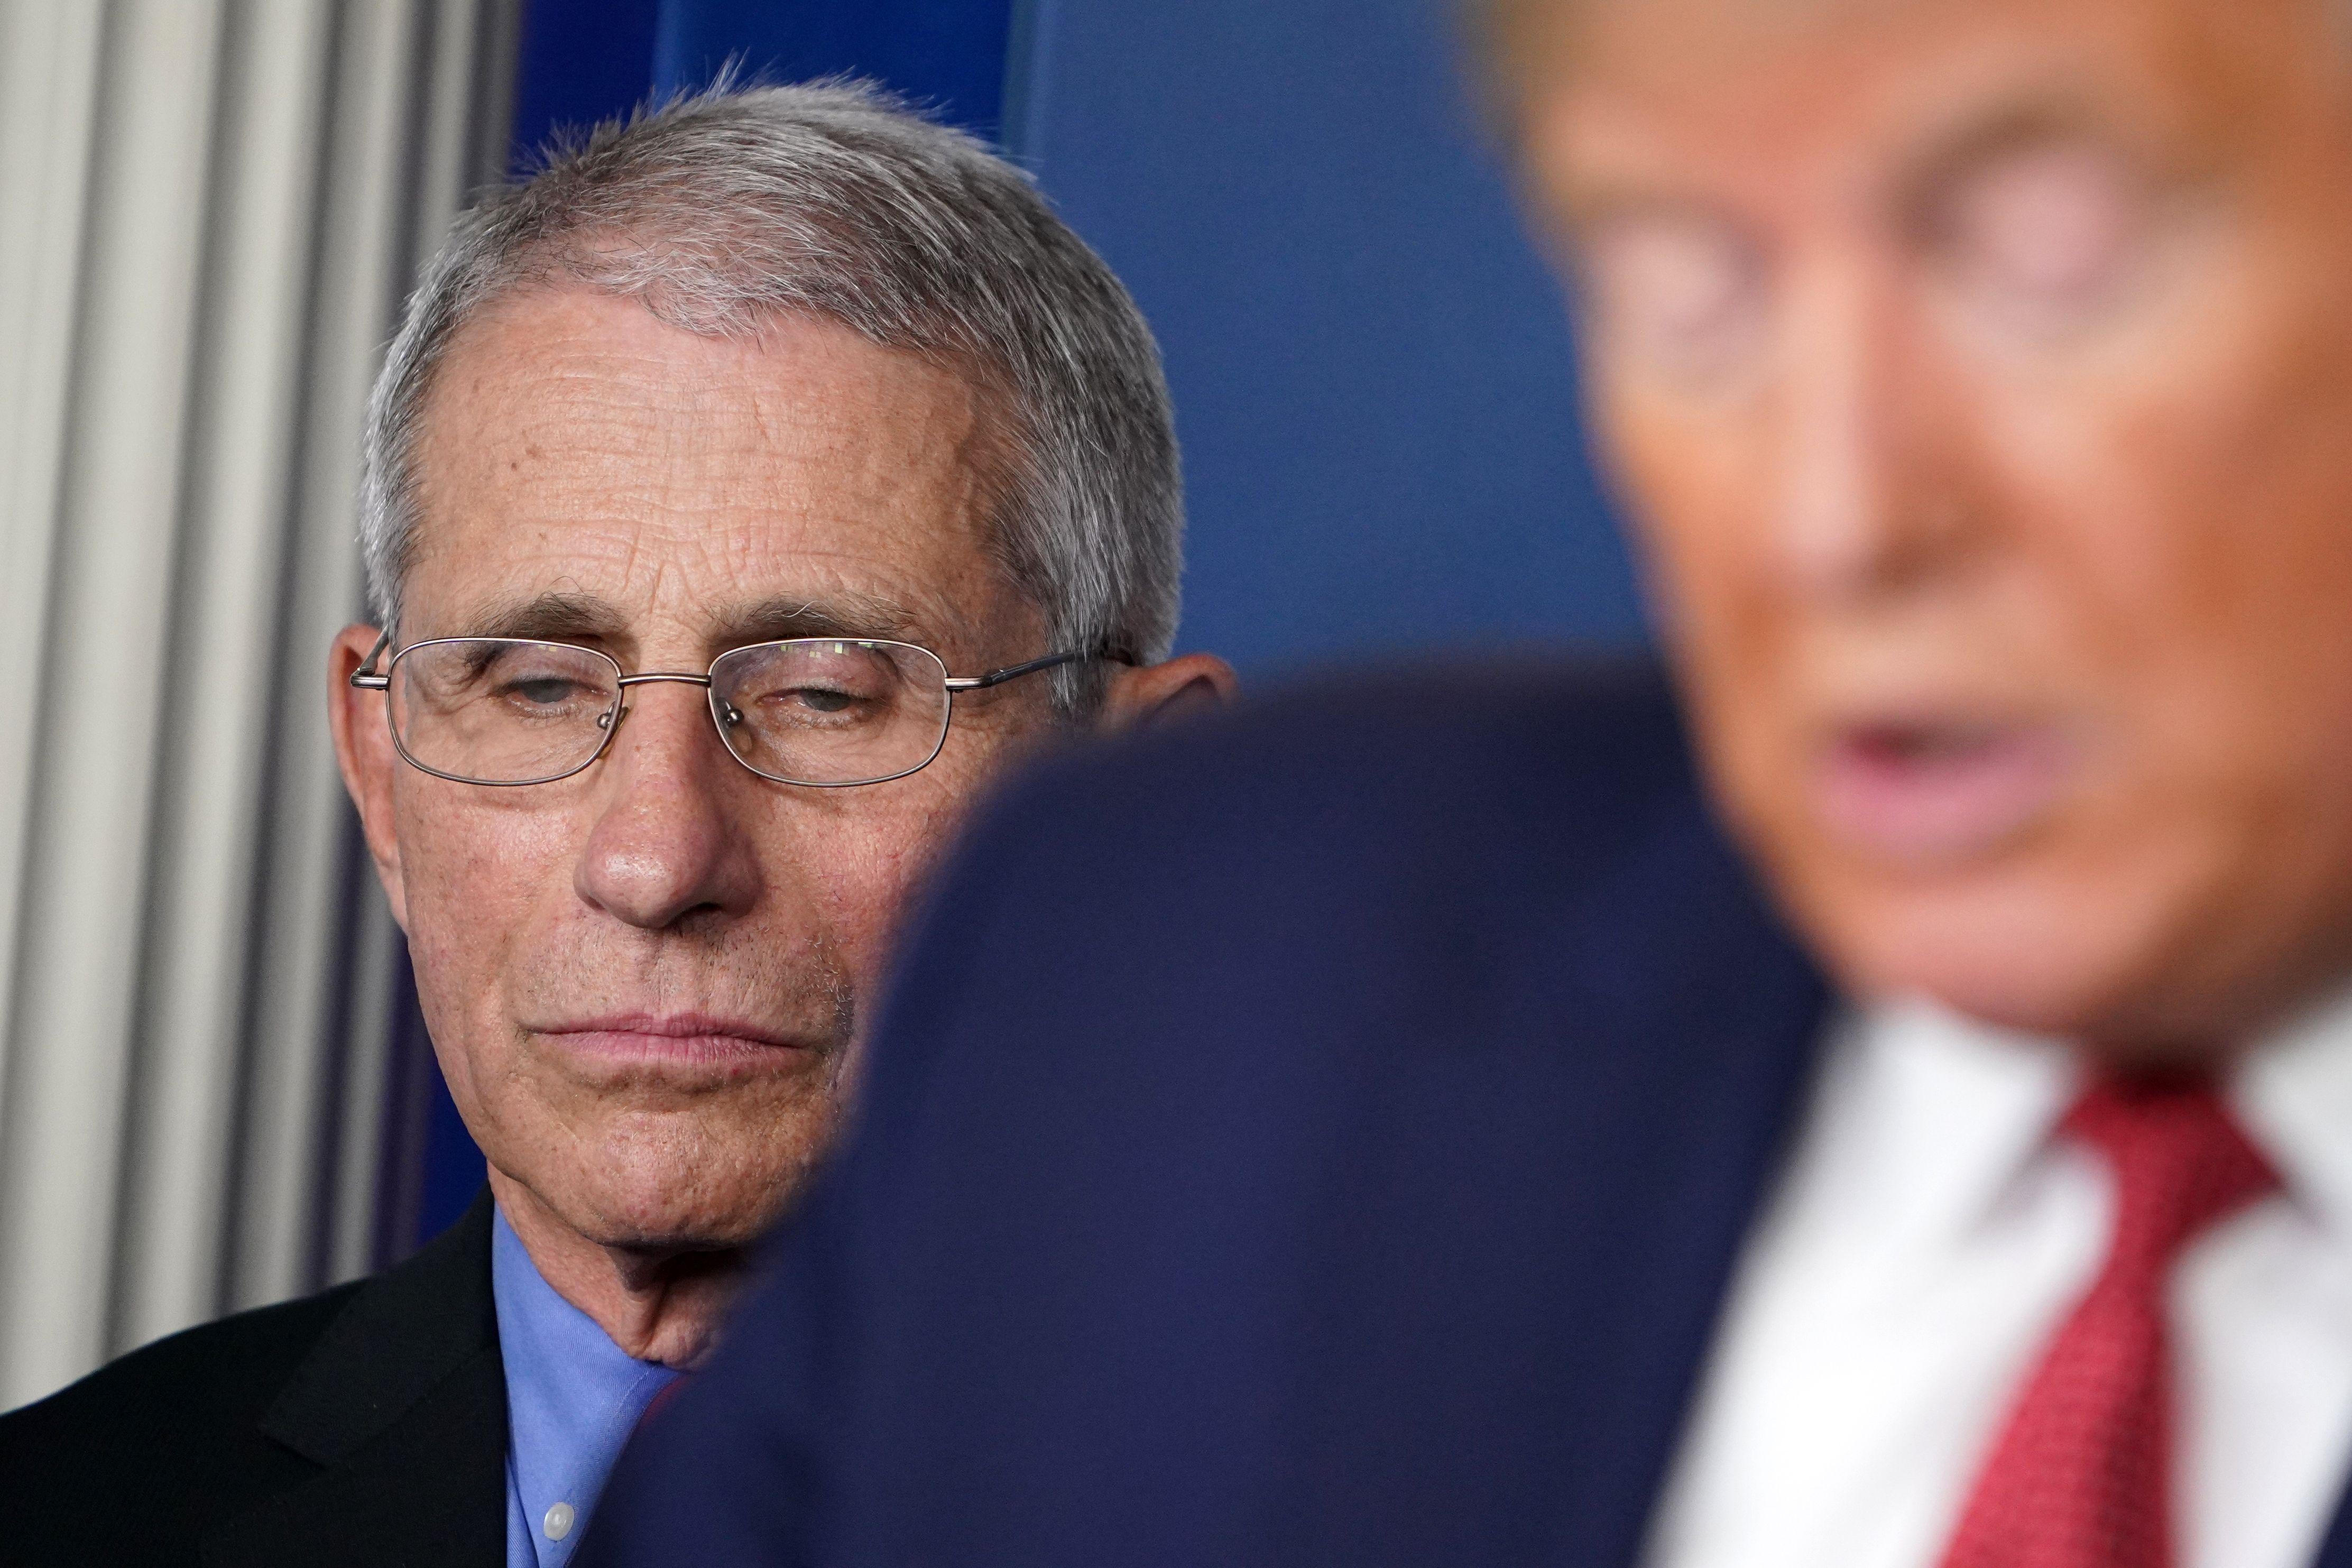 President Donald Trump, flanked by Director of the National Institute of Allergy and Infectious Diseases Anthony Fauci, speaks during the daily briefing on the novel coronavirus, COVID-19, in the Brady Briefing Room at the White House on March 25, 2020, in Washington, D.C.